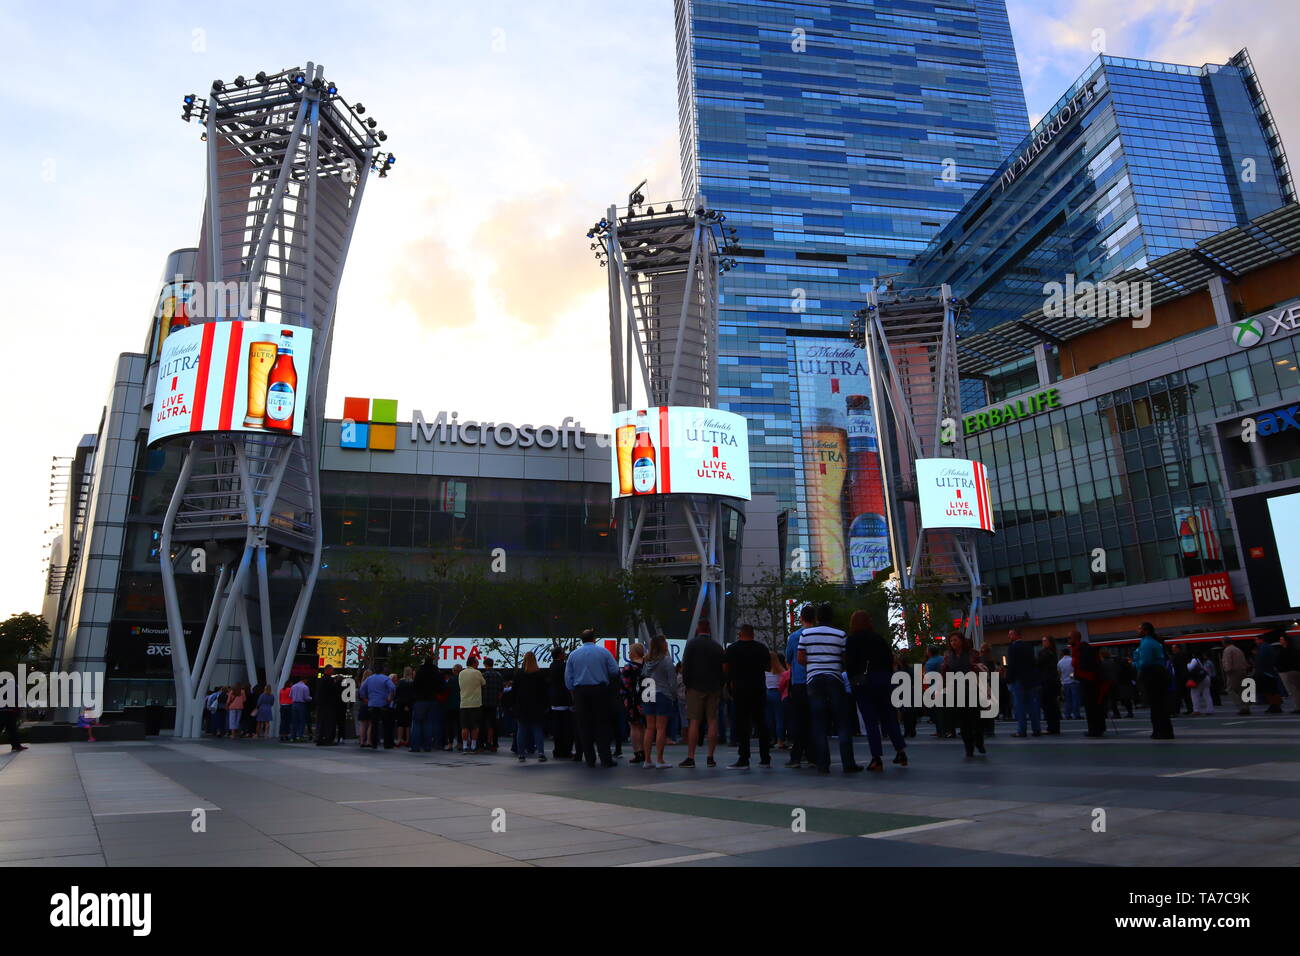 XBOX PLAZA, Microsoft Theater in front of the Staples Center, downtown of Los Angeles - California Stock Photo